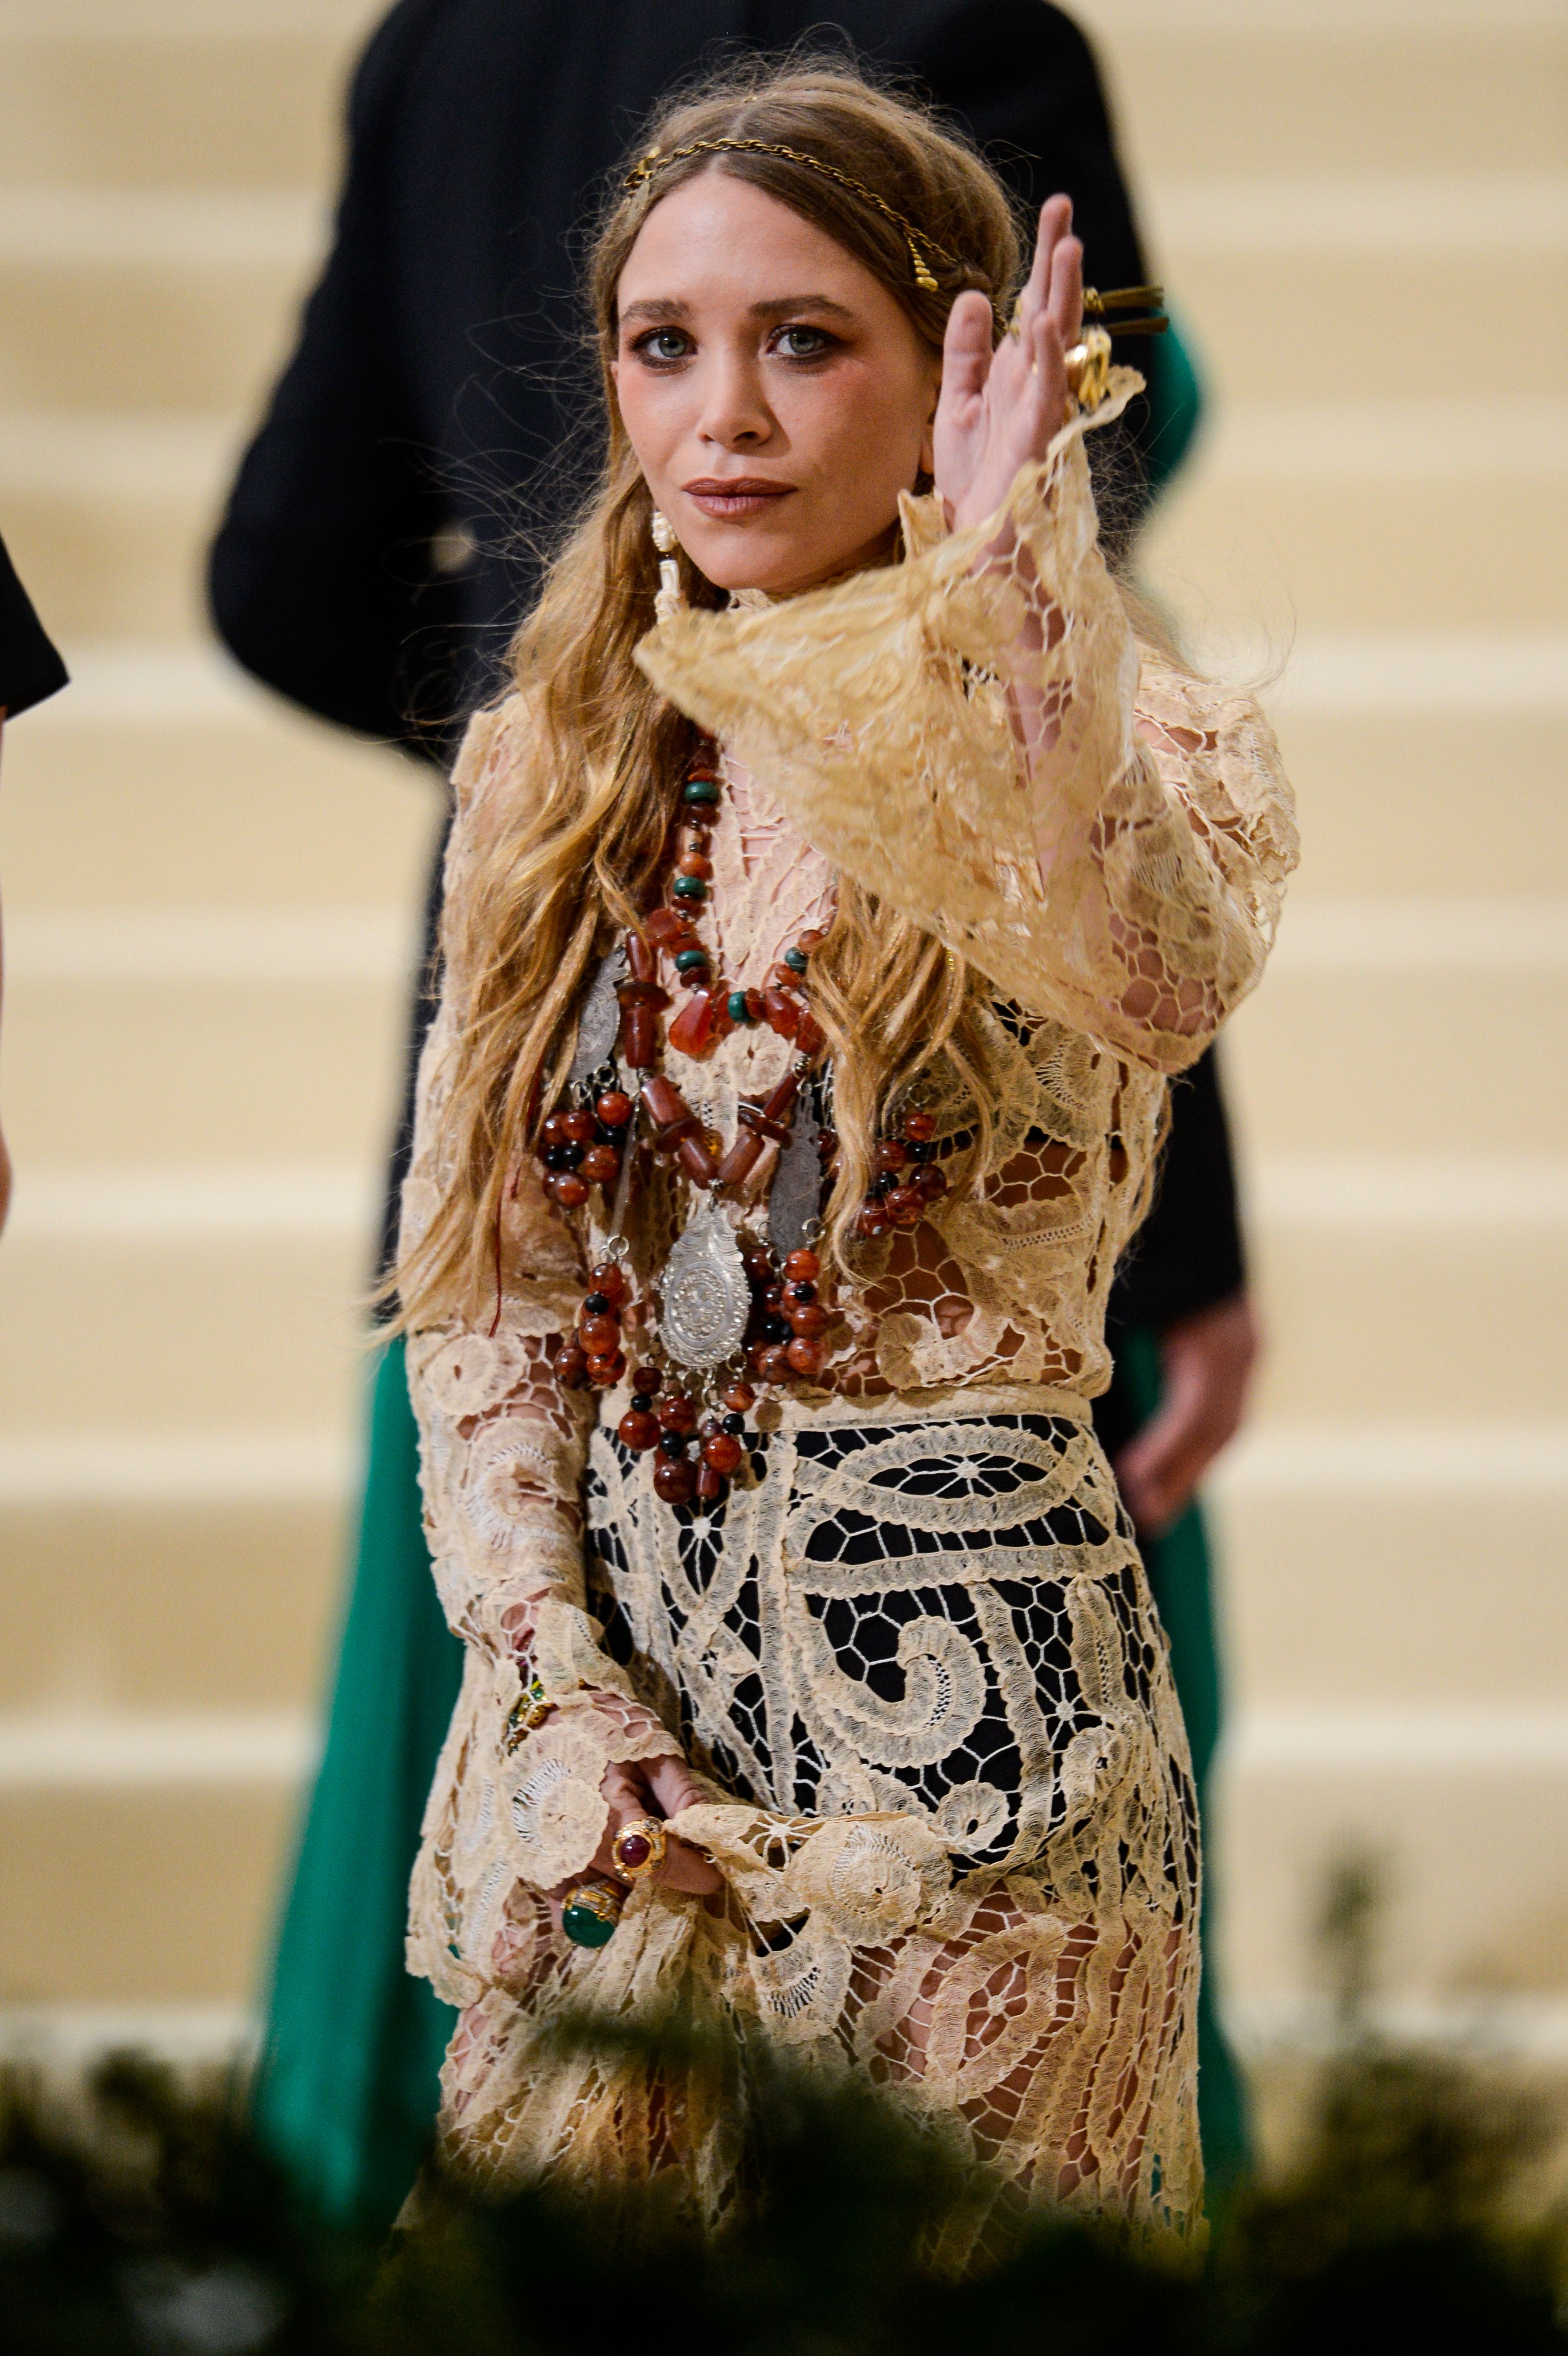 Mary-Kate Olsen ar the Rei Kawakubo/Comme des Garcons: Art Of The In-Between" Costume Institute Gala at the Metropolitan Museum of Art on May 01, 2017 in New York City.  | Source: Getty Images